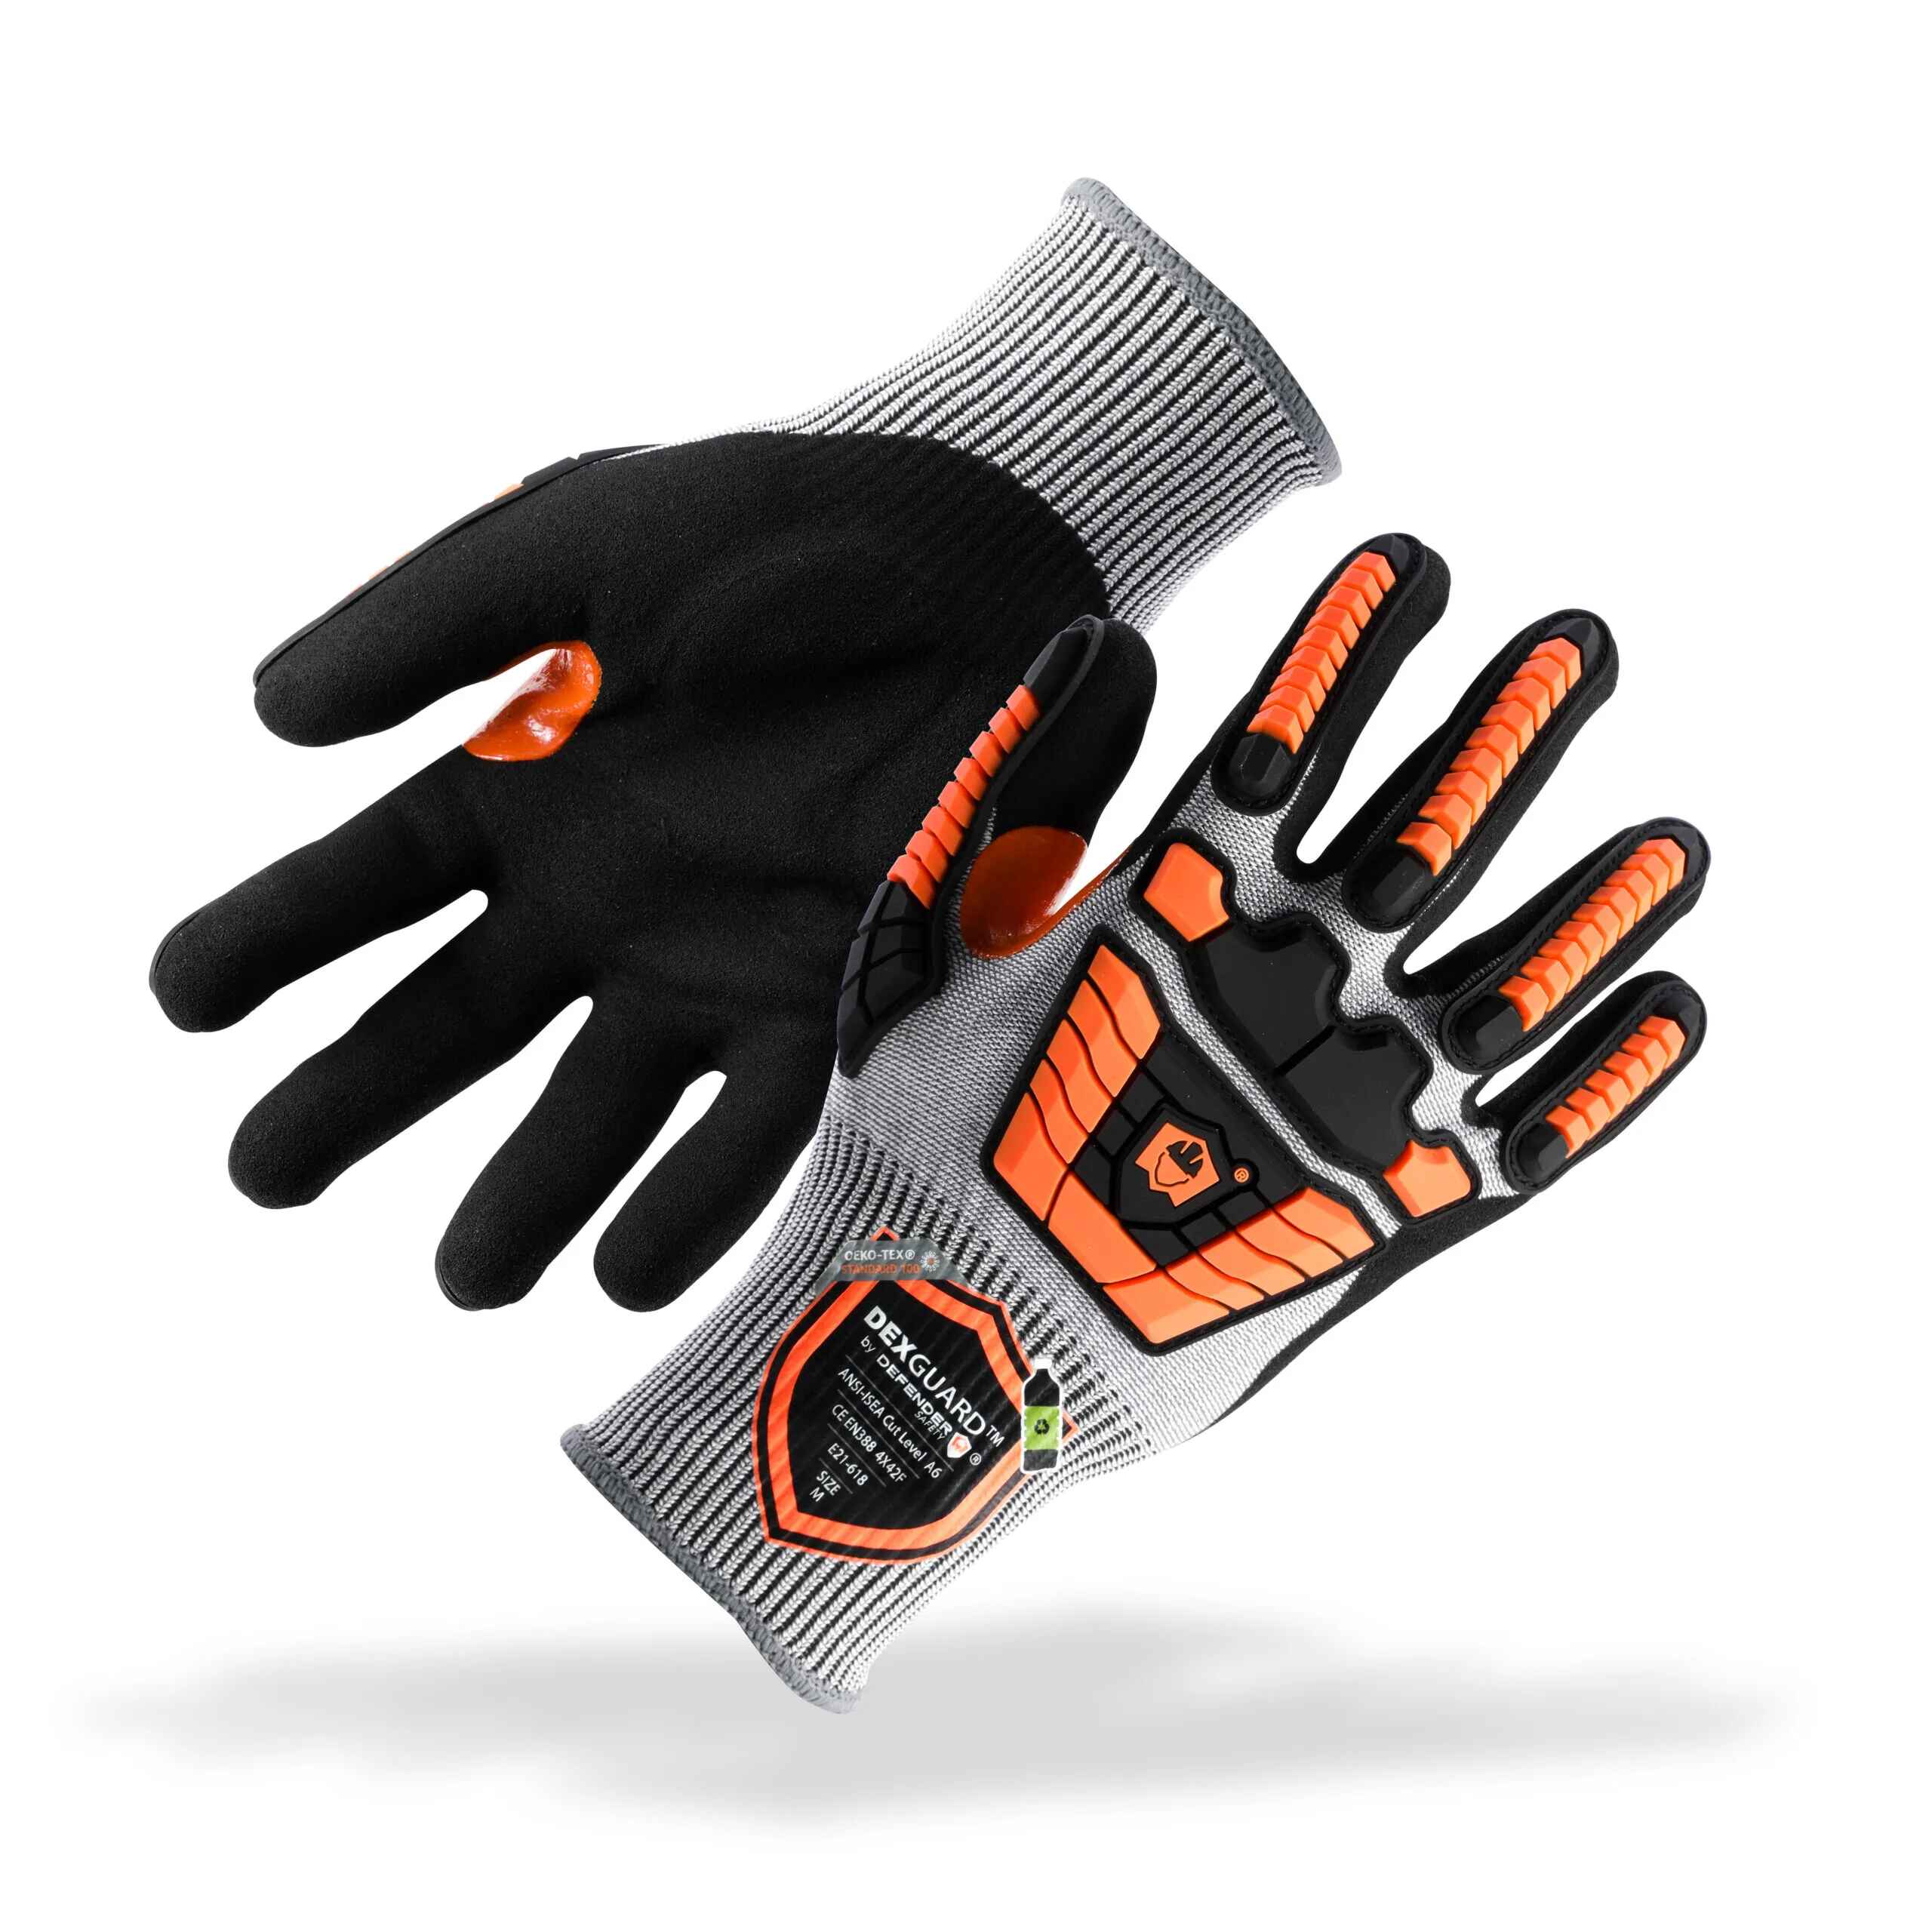 BDG BDG X-SITE MECHANIC GLOVES, RED/YLW, XS/6, MICROFIBER/SPANDEX,  ANSI/ISEA ABRASION 4/CUT A5 - Mechanics- & Riggers-Style Cut-Resistant  Gloves - ALG20110623XS